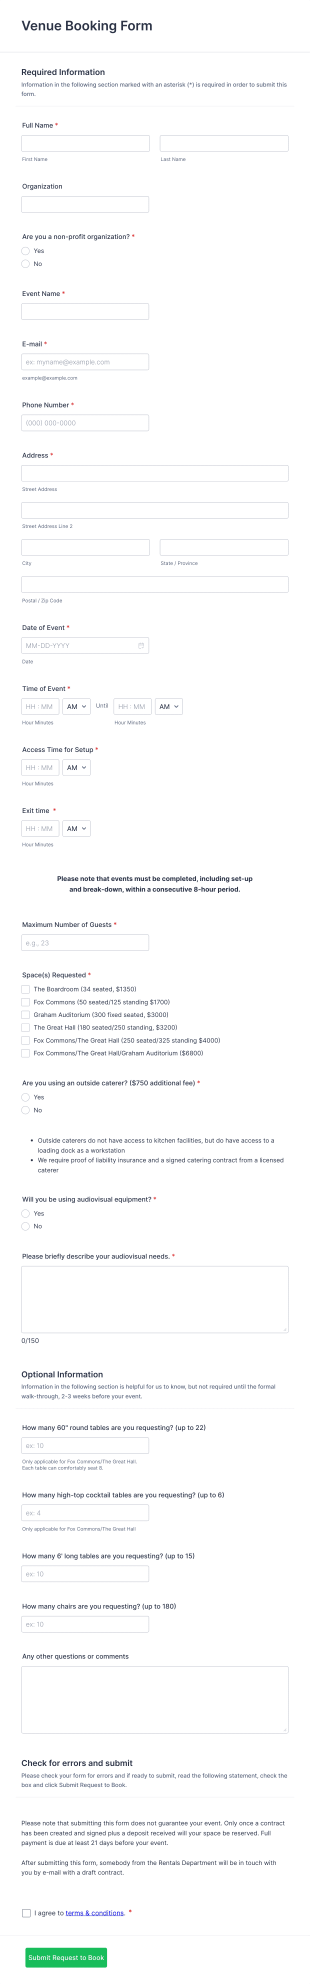 Venue Booking Form Template